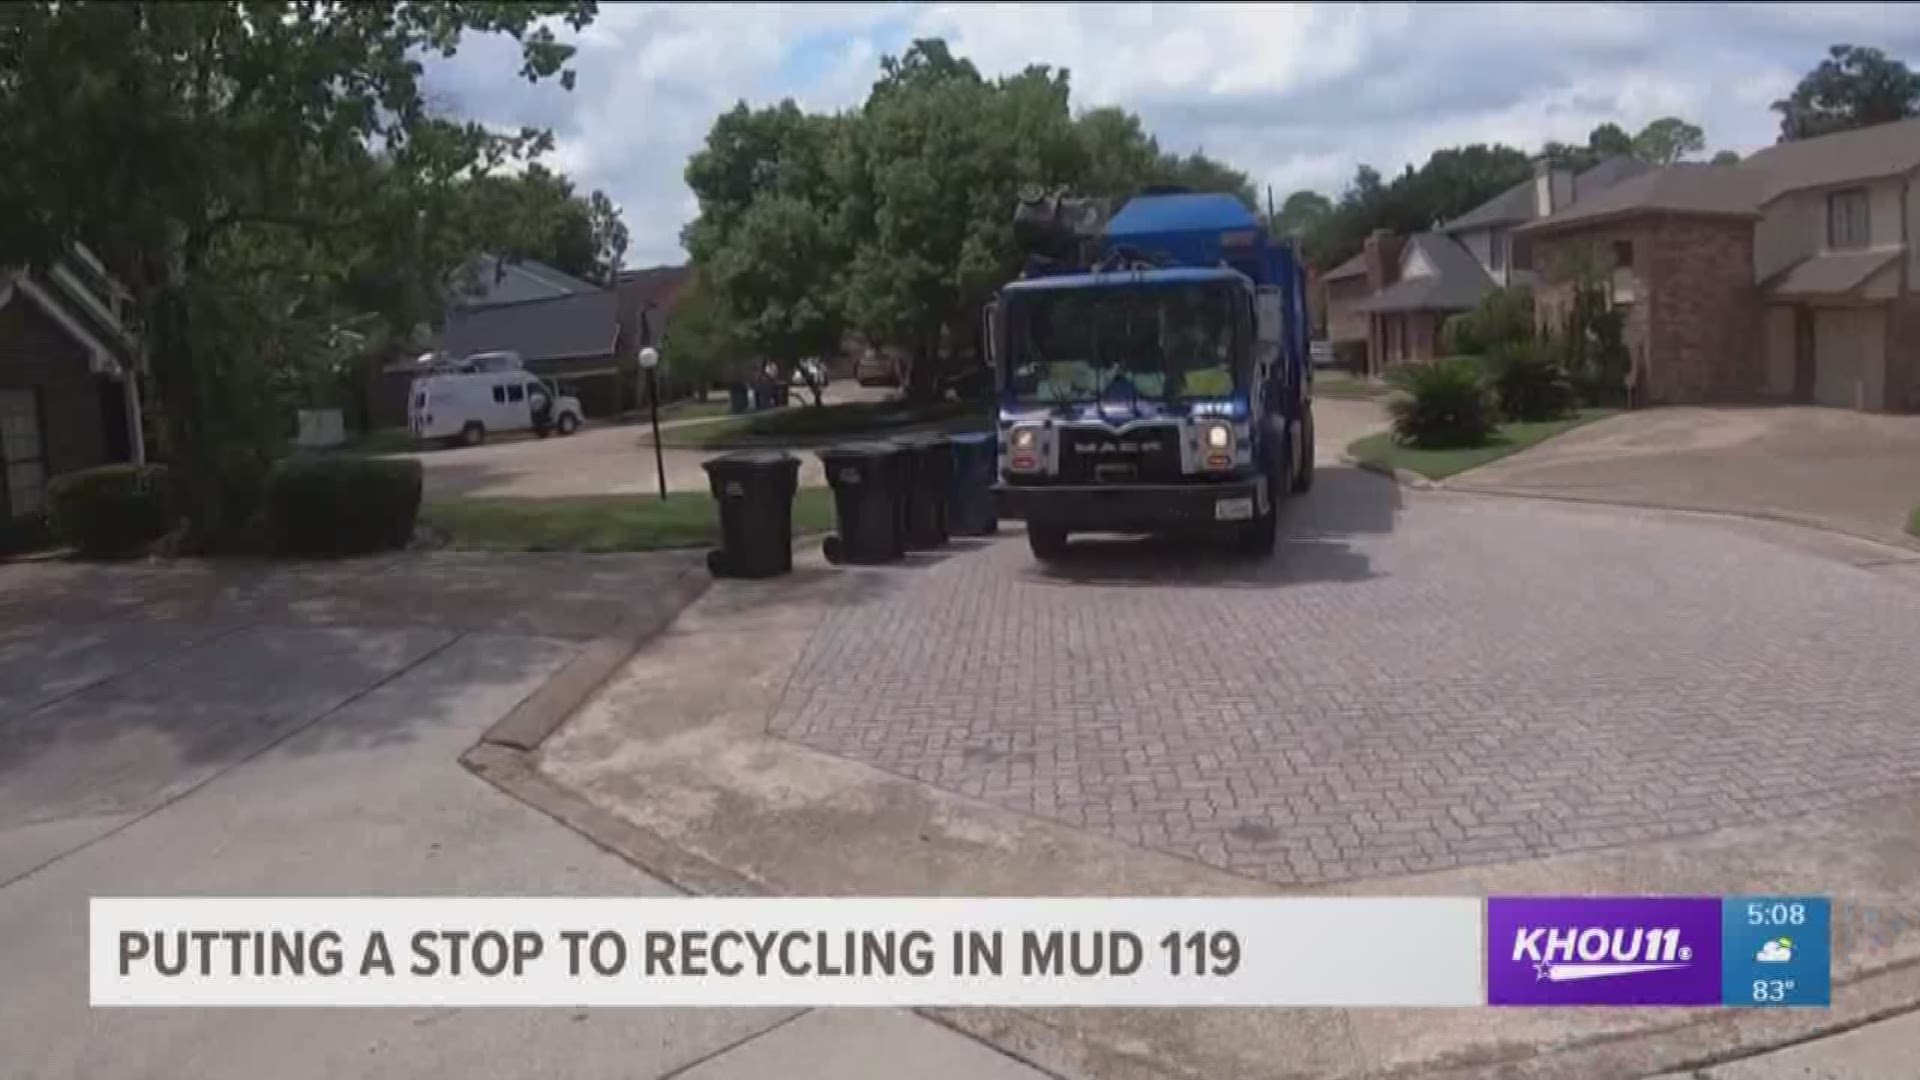 Recycling is coming to an end for some residents in northwest Harris County.